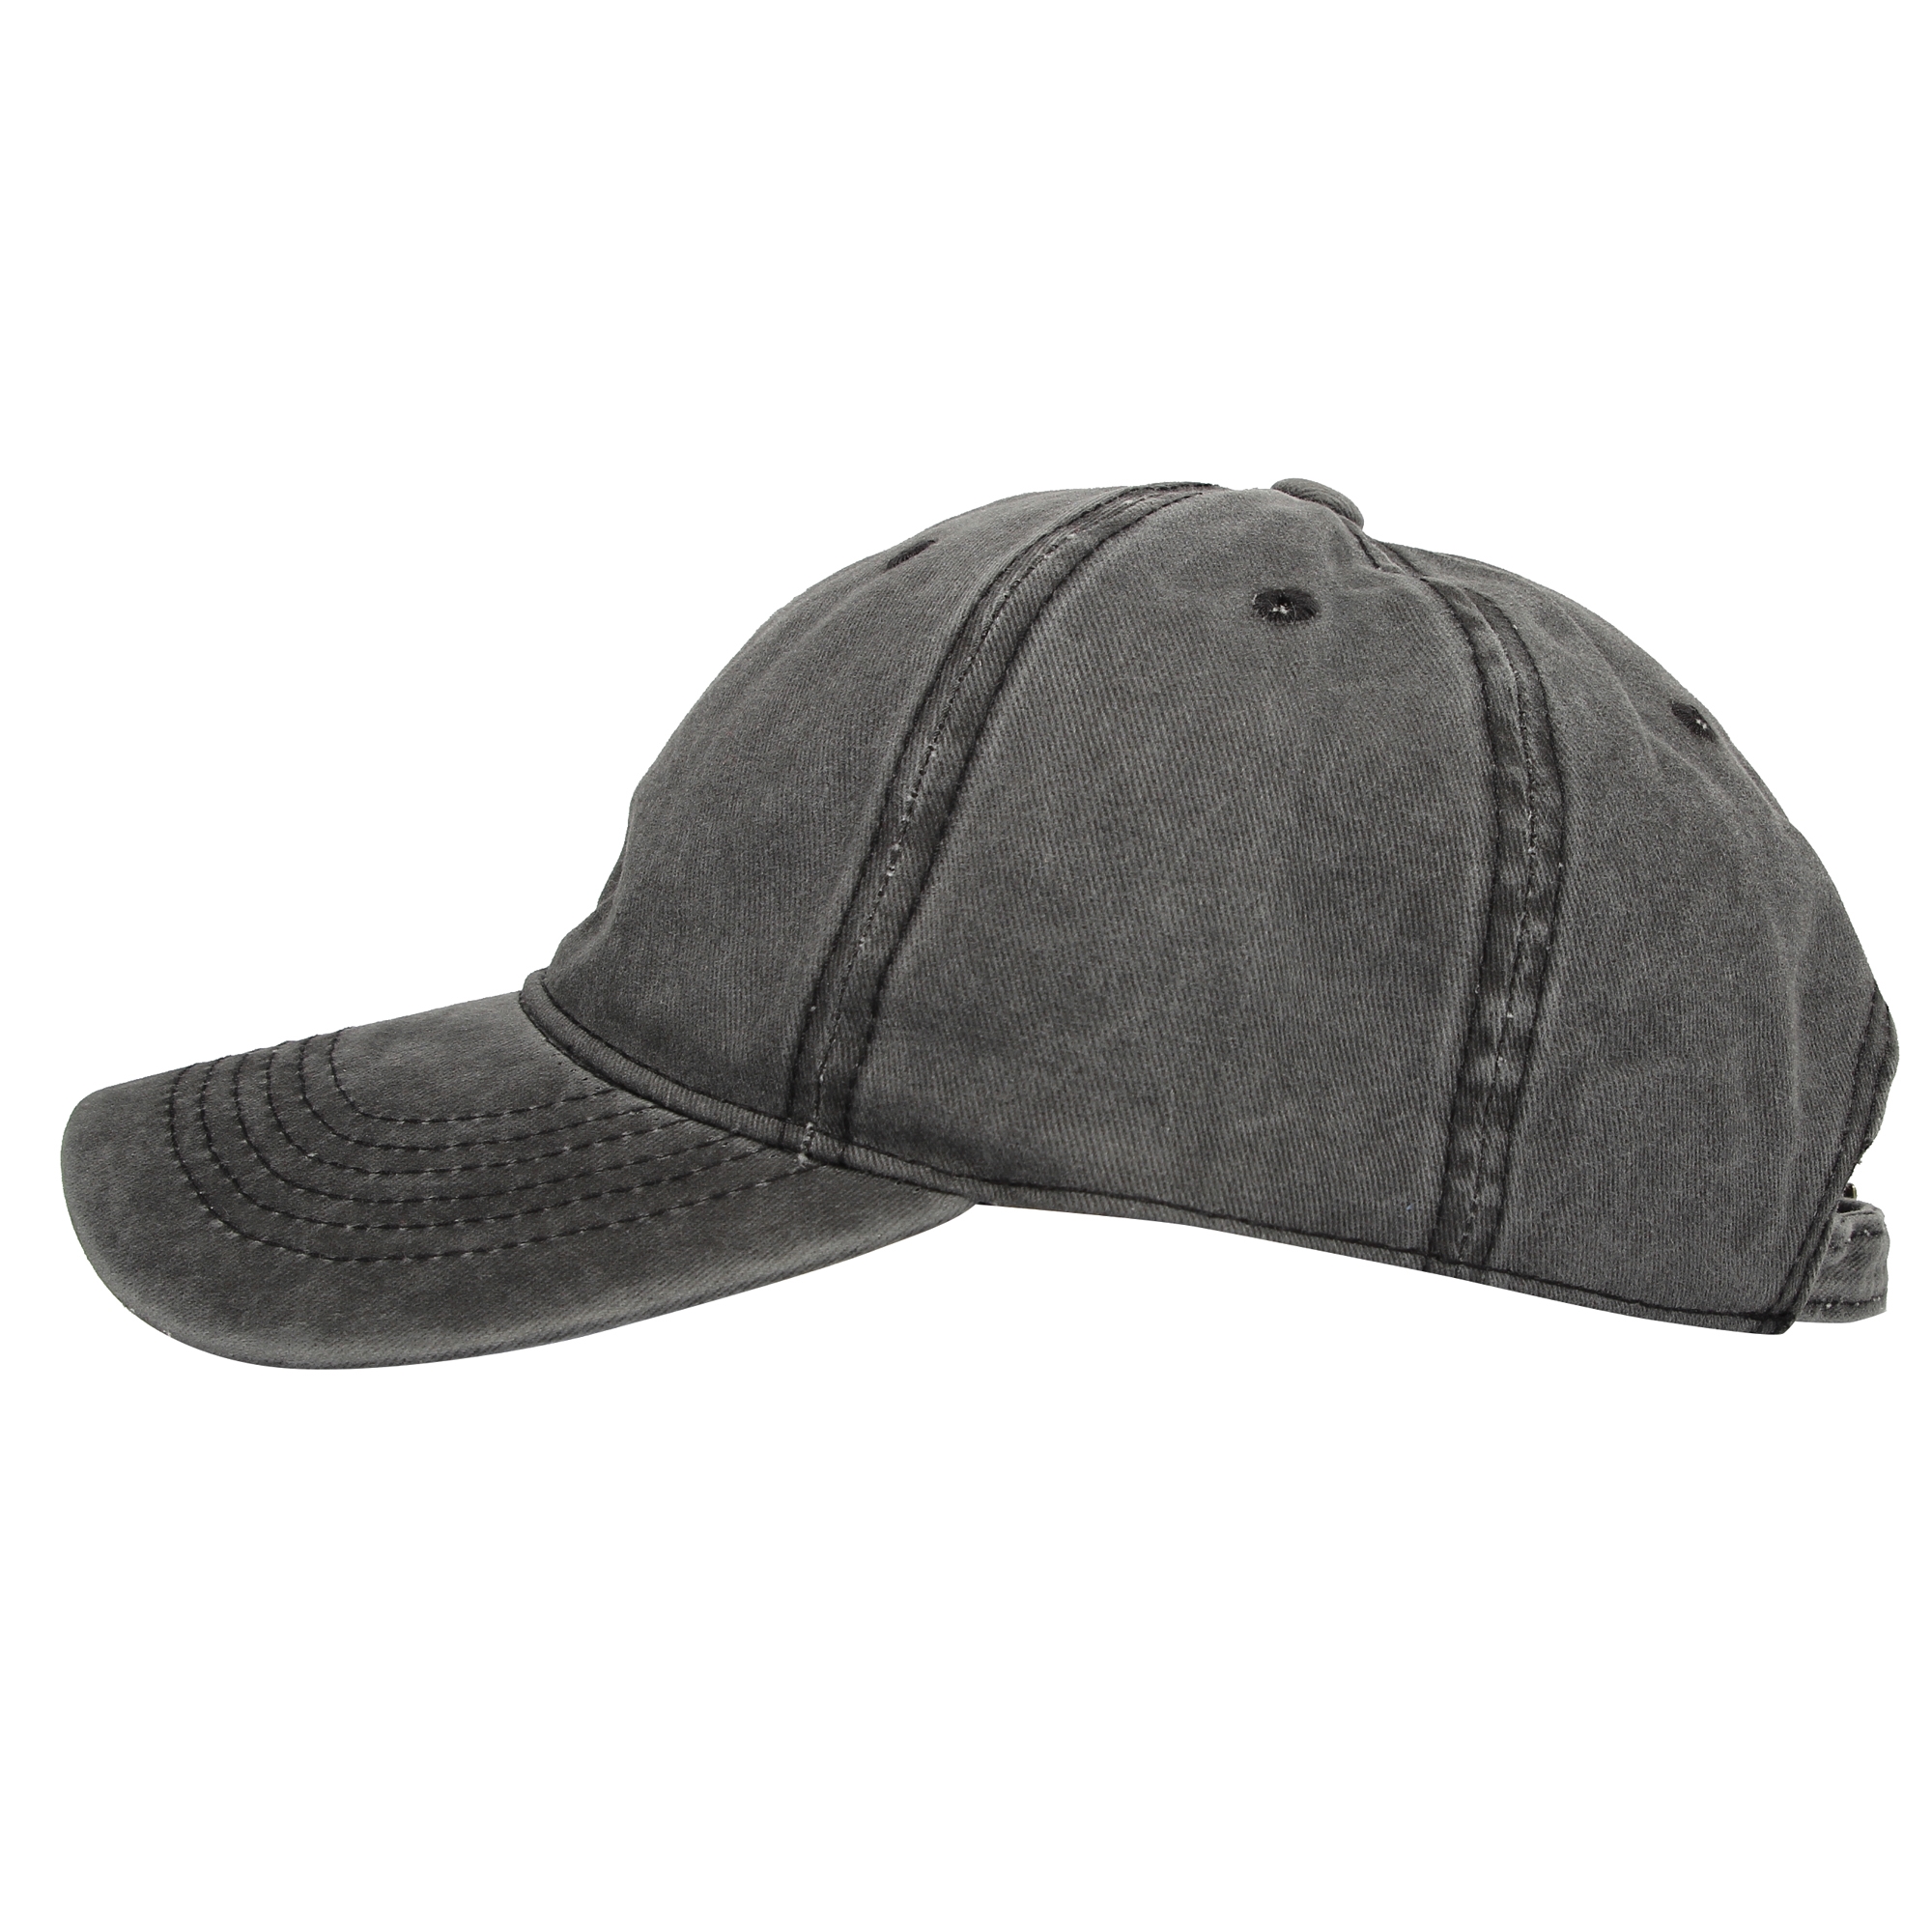 WITHMOONS Vintage Washed Twill Cotton Baseball-Cap Adjustable Dad-Hat ...